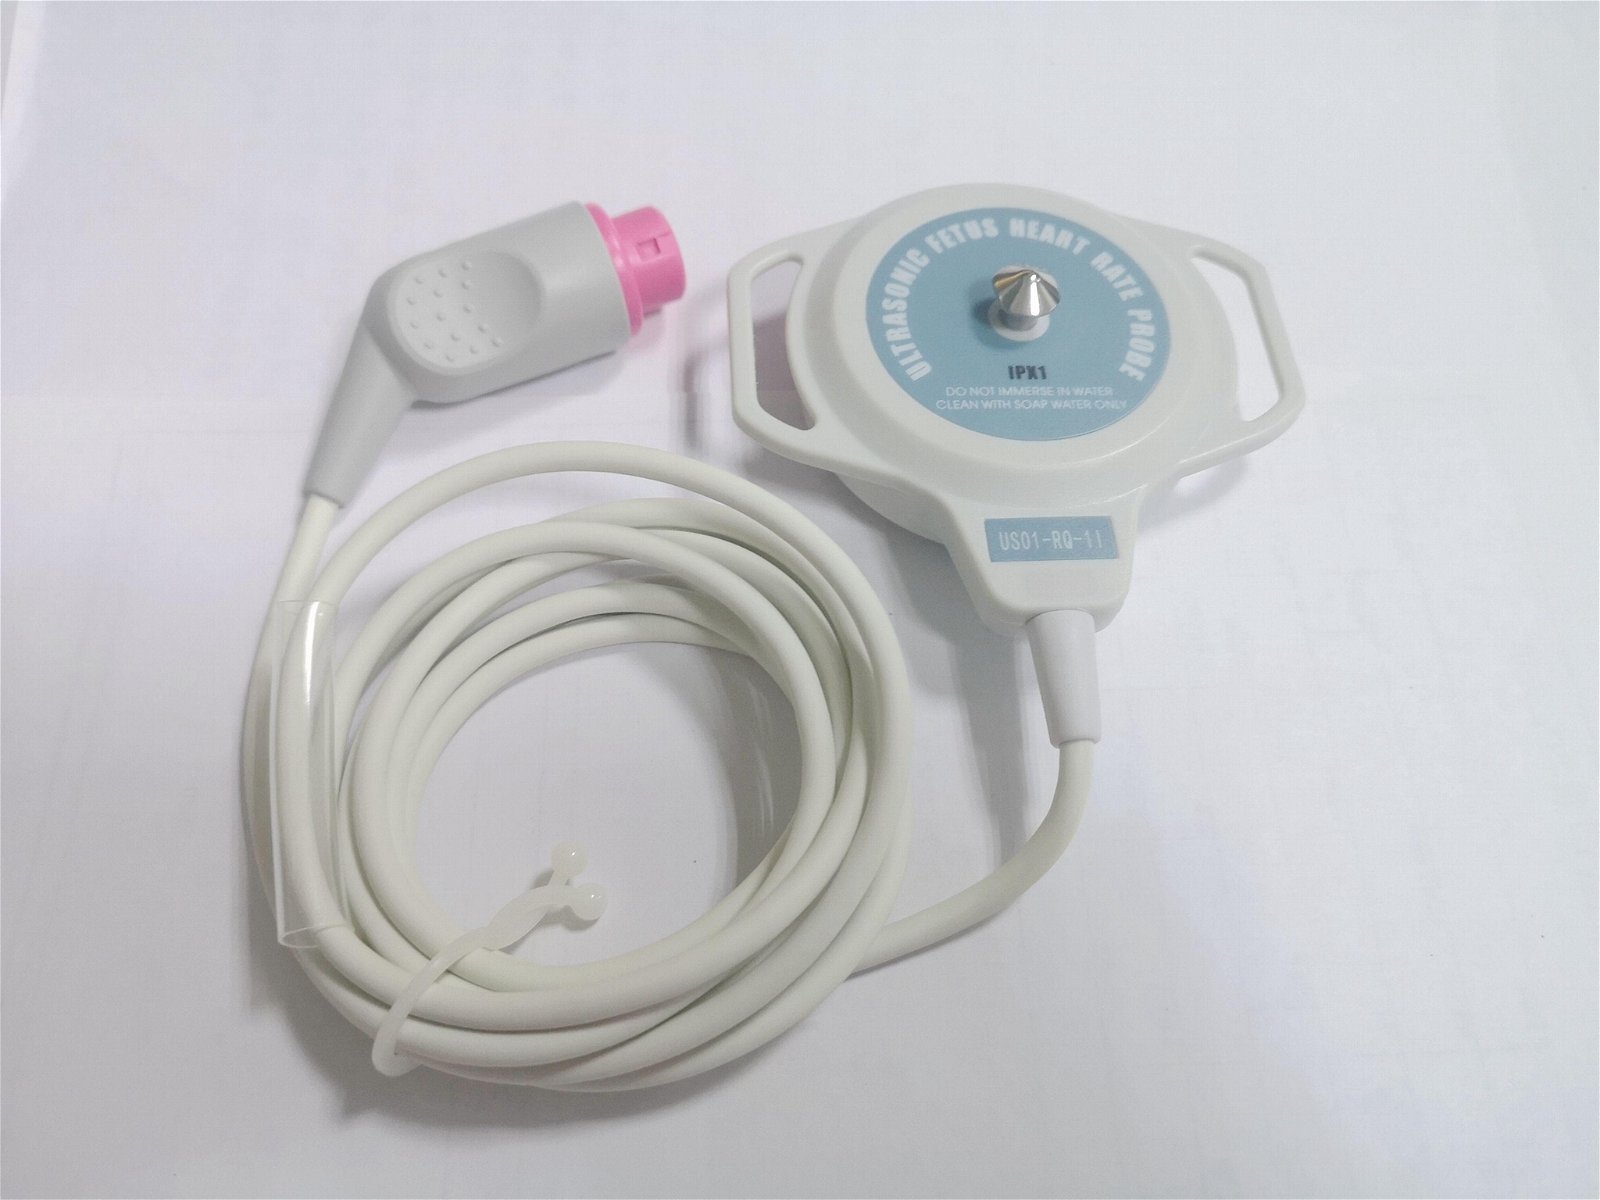 US fetal transducer/probe for Philips M1350 series 2